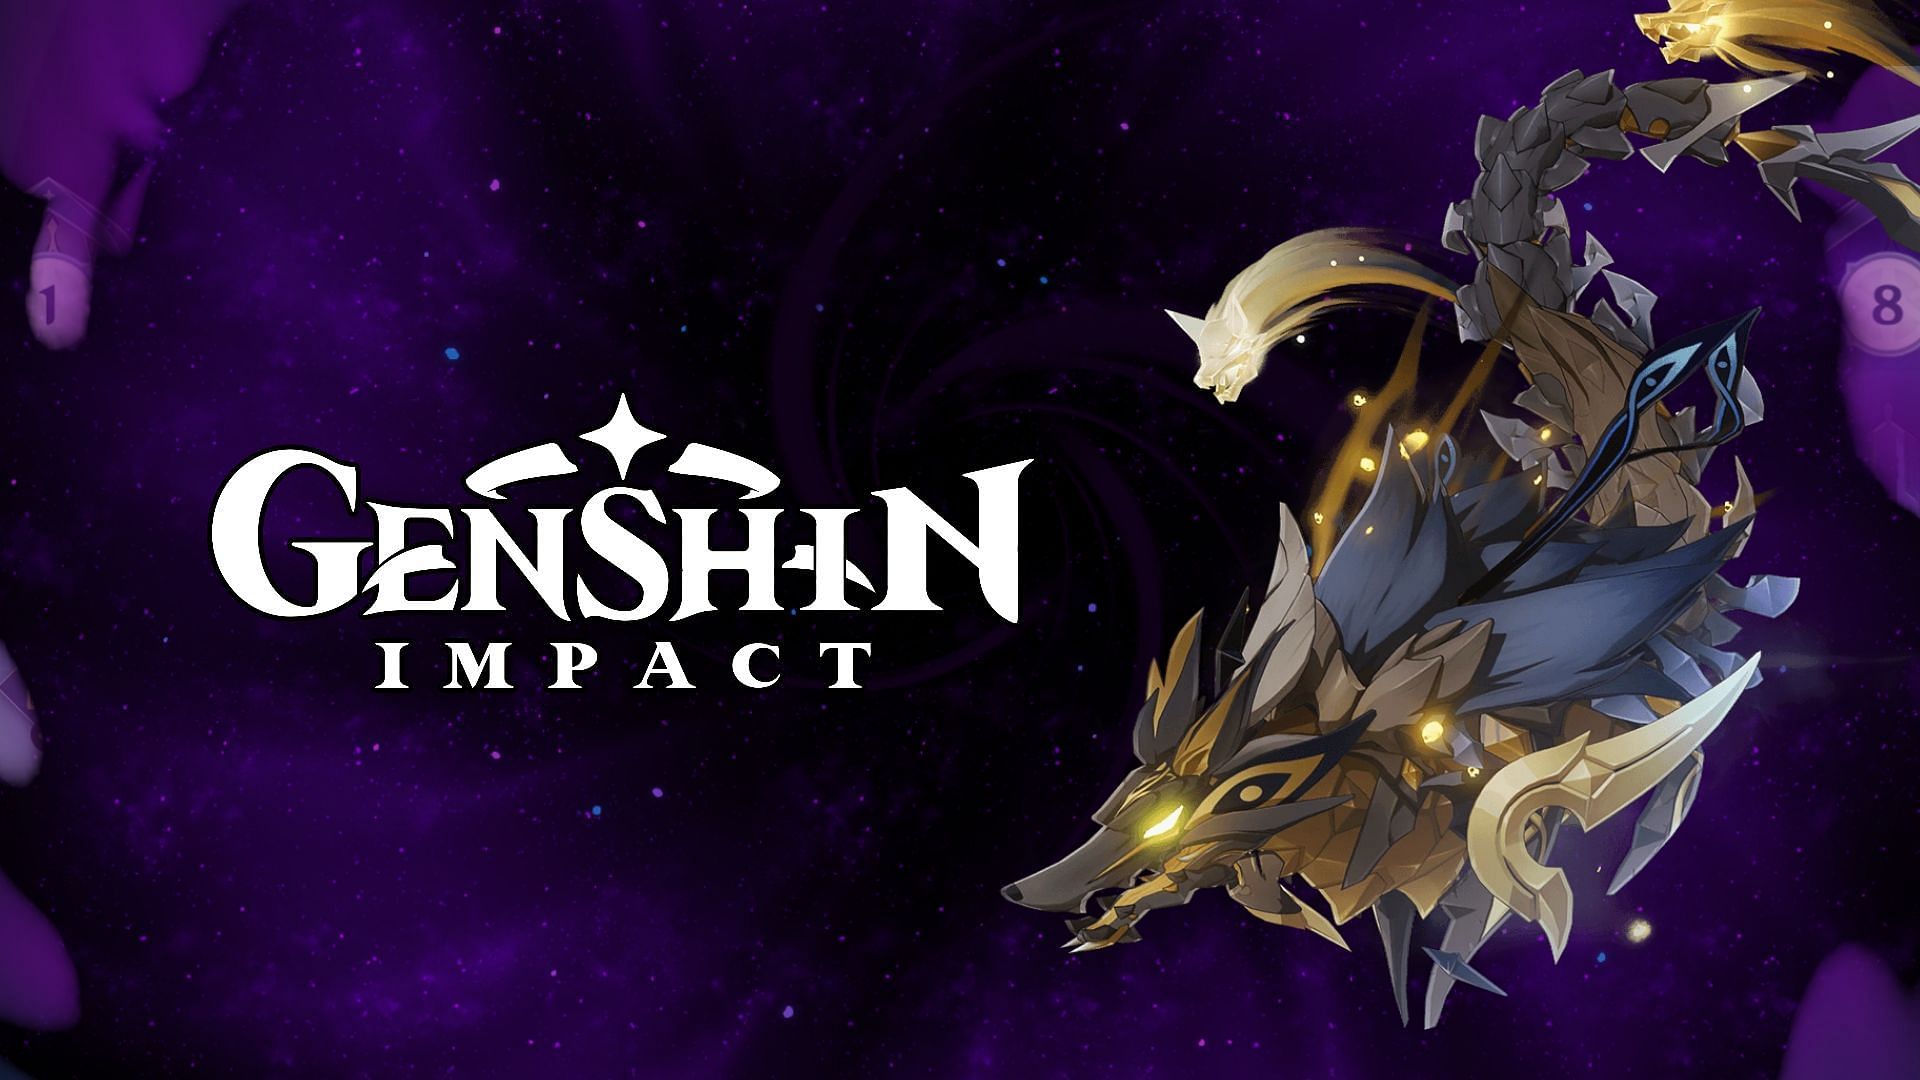 Genshin Impact 2.5 will make Spiral Abyss fans get well acquainted with the Golden Wolflord (Image via miHoYo)